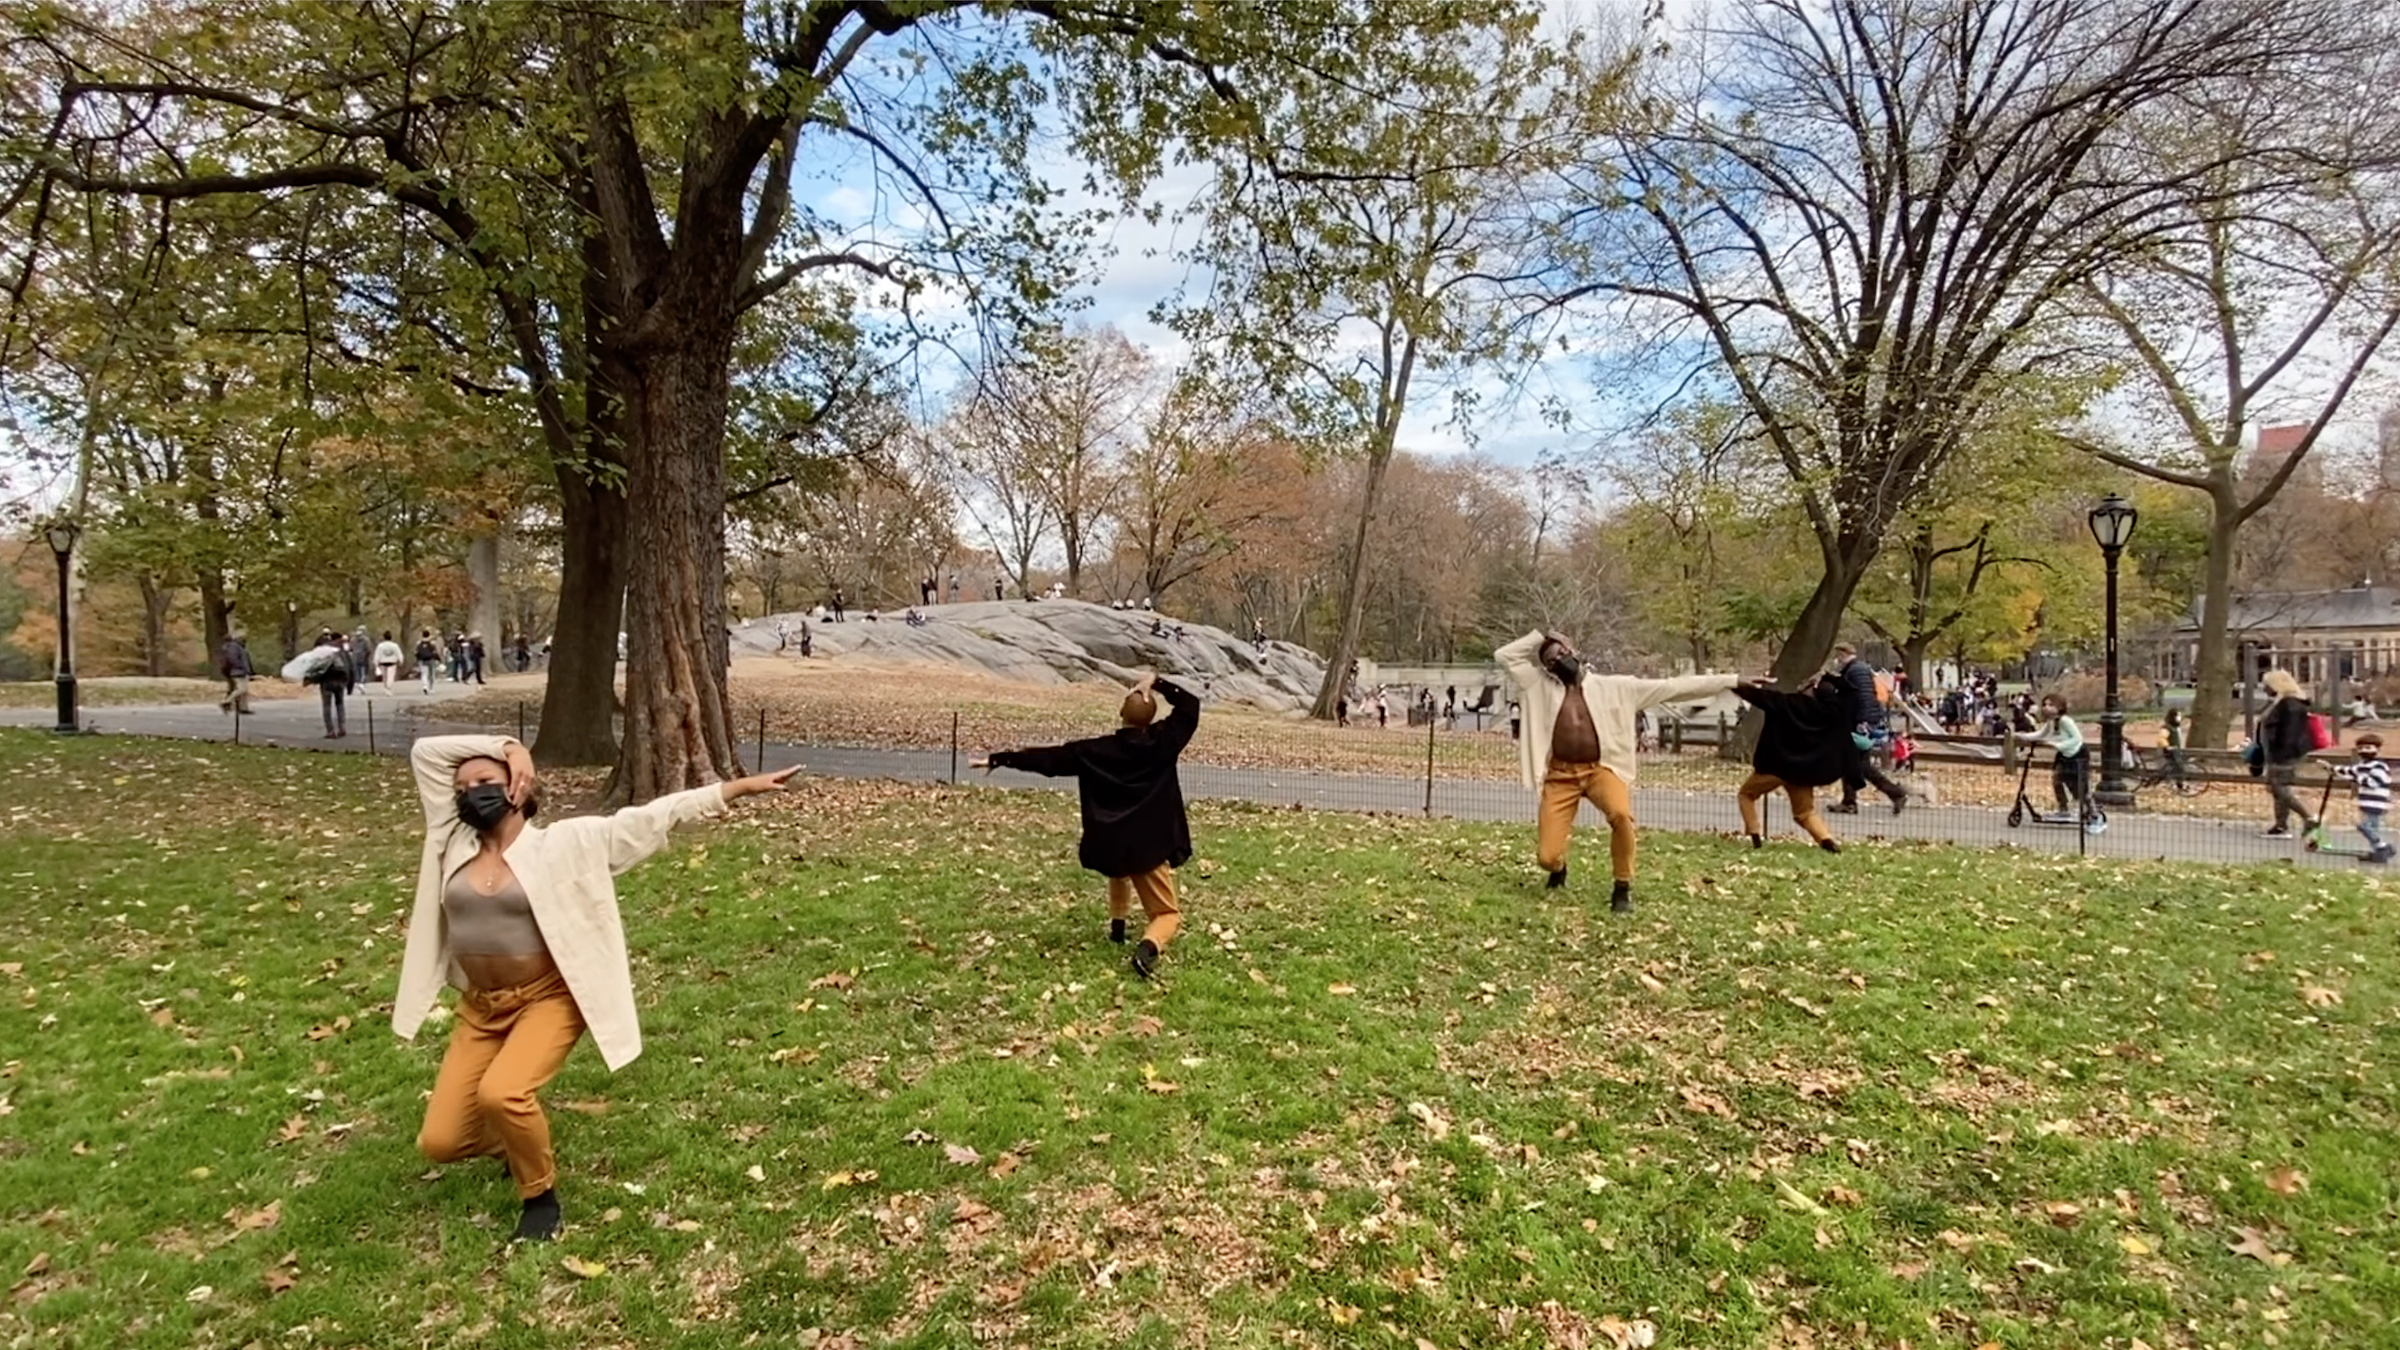 Dancers dancing on the line in Central Park